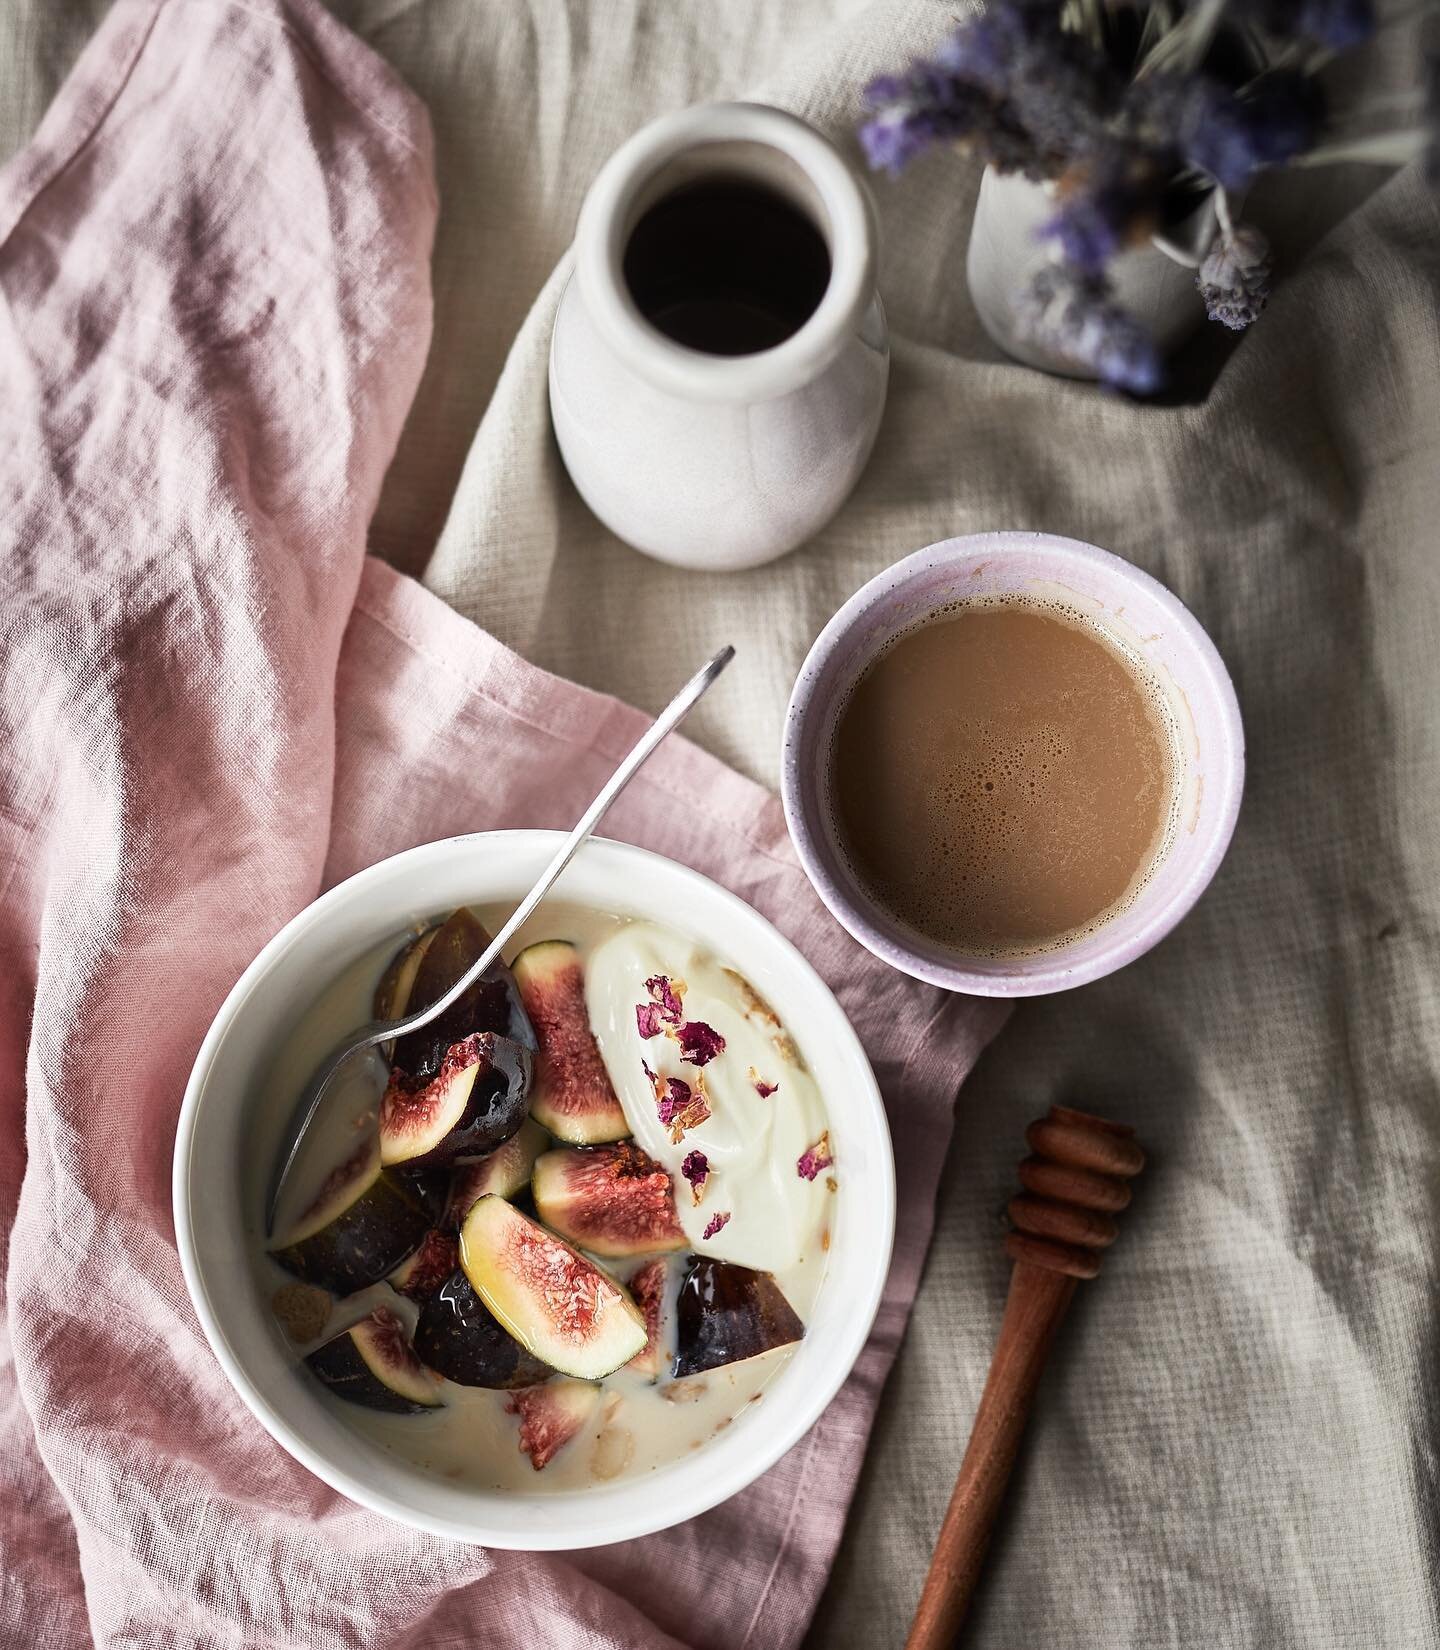 Quick pic. Nothing fancy, just my favourite seasonal breakfast... fresh figs atop a bed a raw oats, some soy milk, a dollop of Greek yoghurt and a drizzle of local honey. No baking required 😊

#mymoodymonday is almost upon us again, I am a guest jud